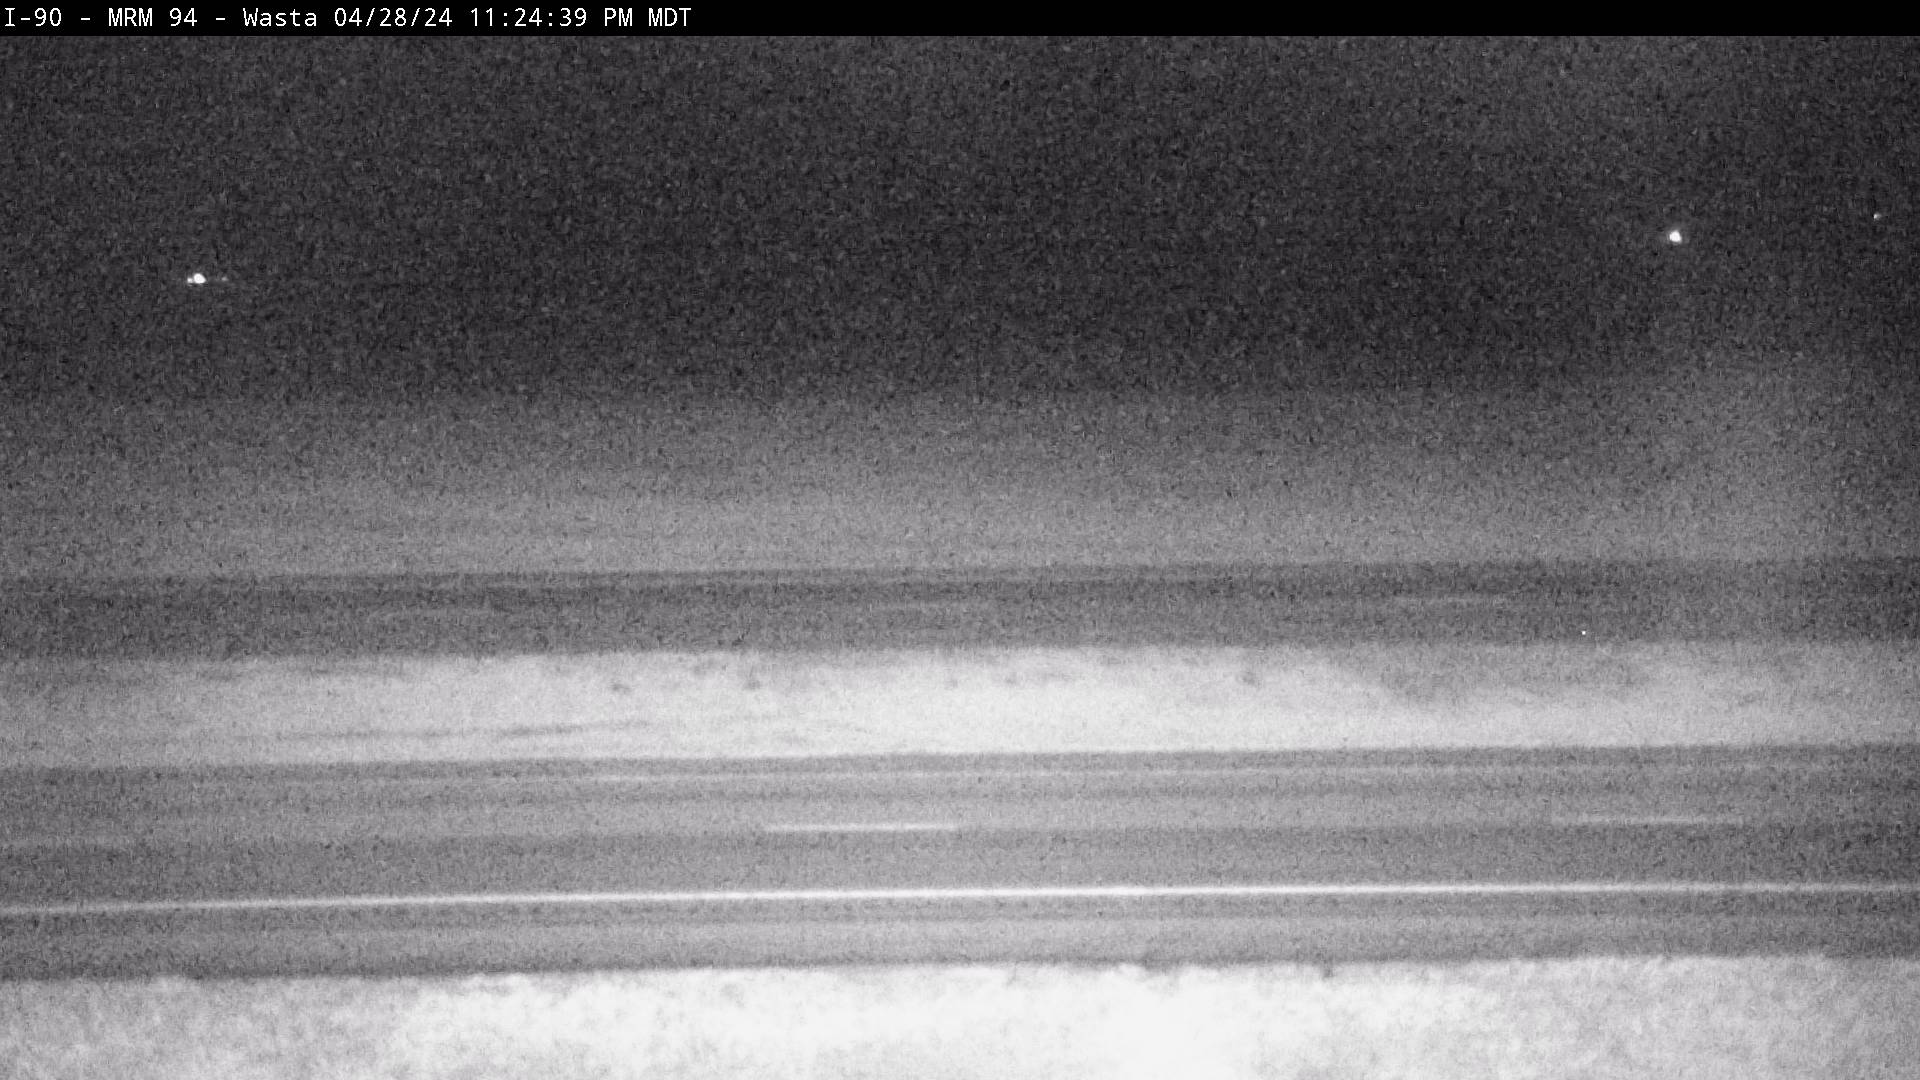 Traffic Cam West of town along I-90 @ MP 94.6 - North Player